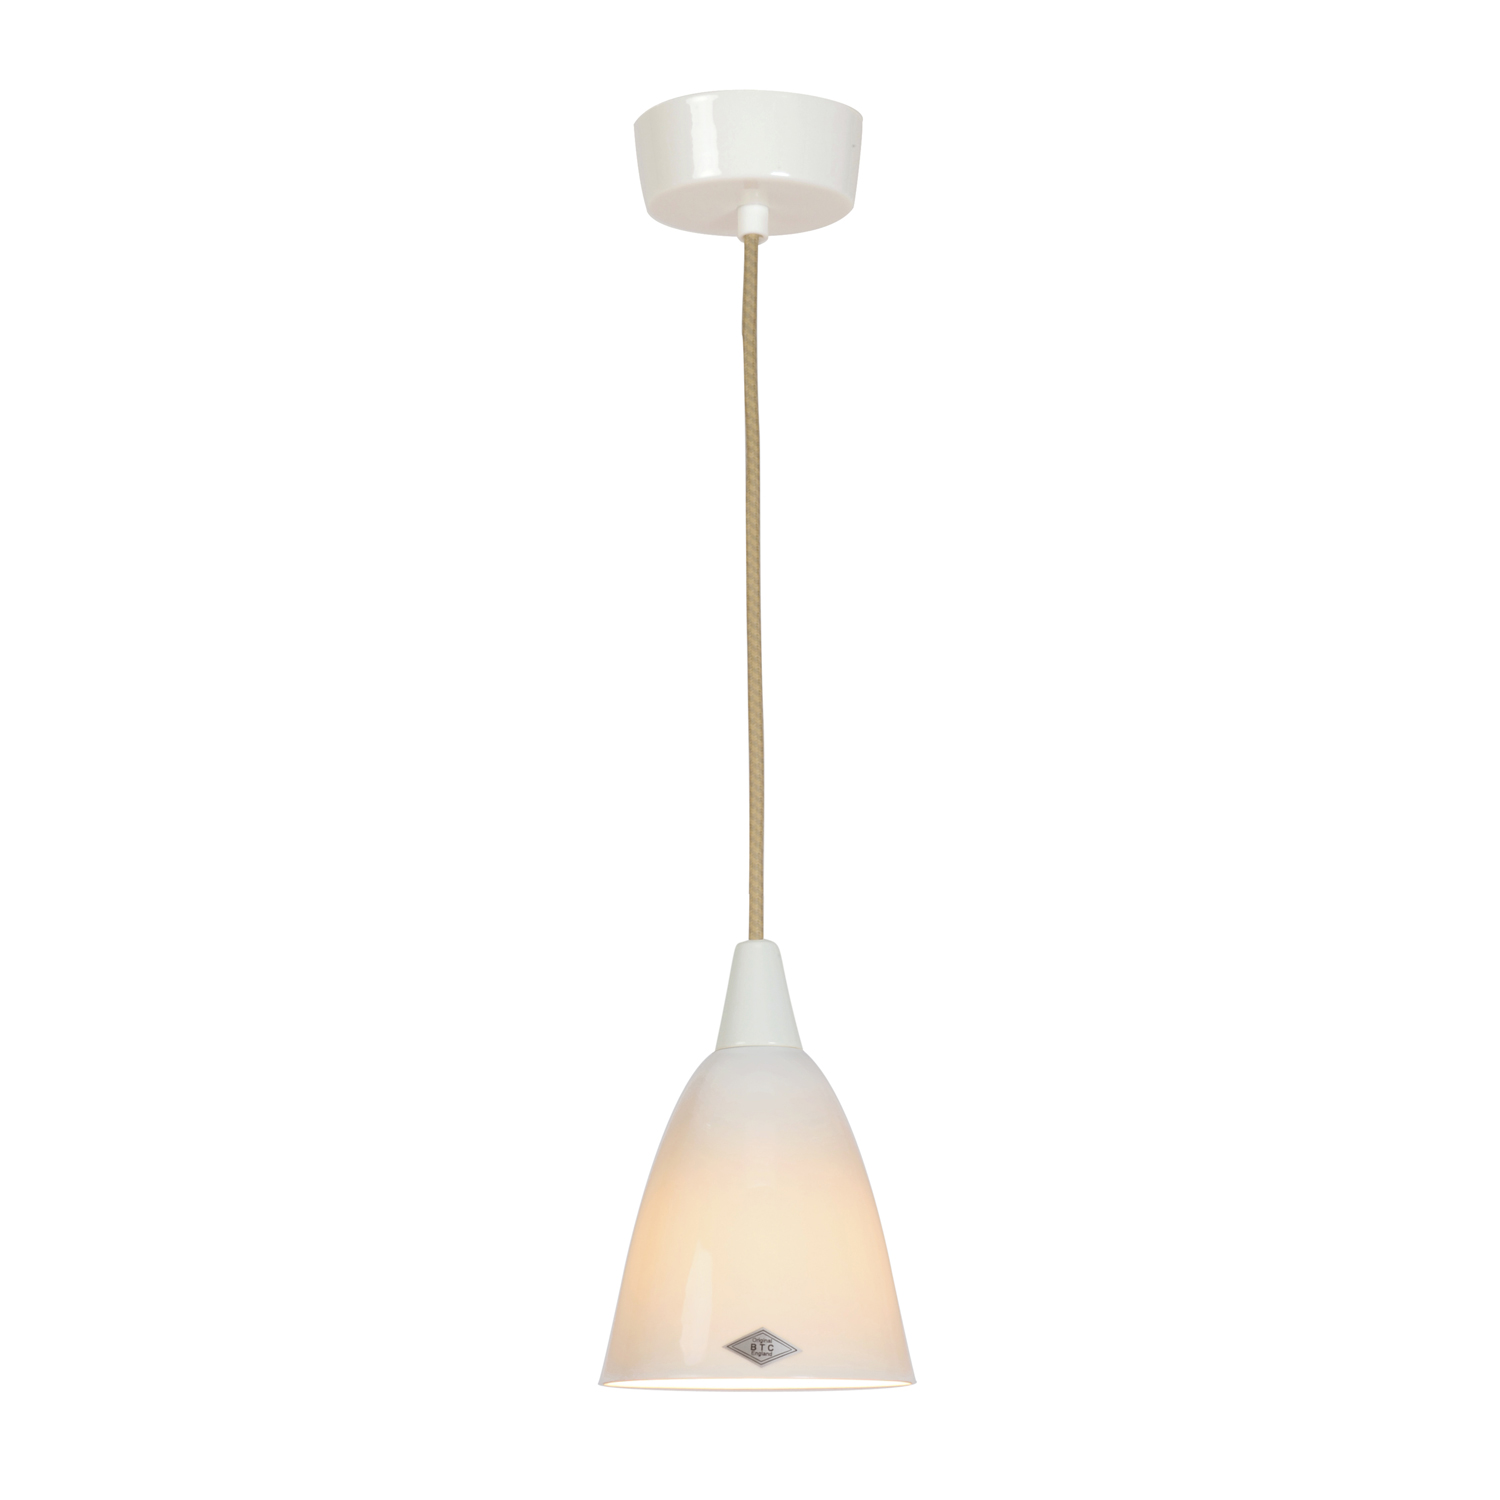 Hector Size 1 Pendant Light, Natural1